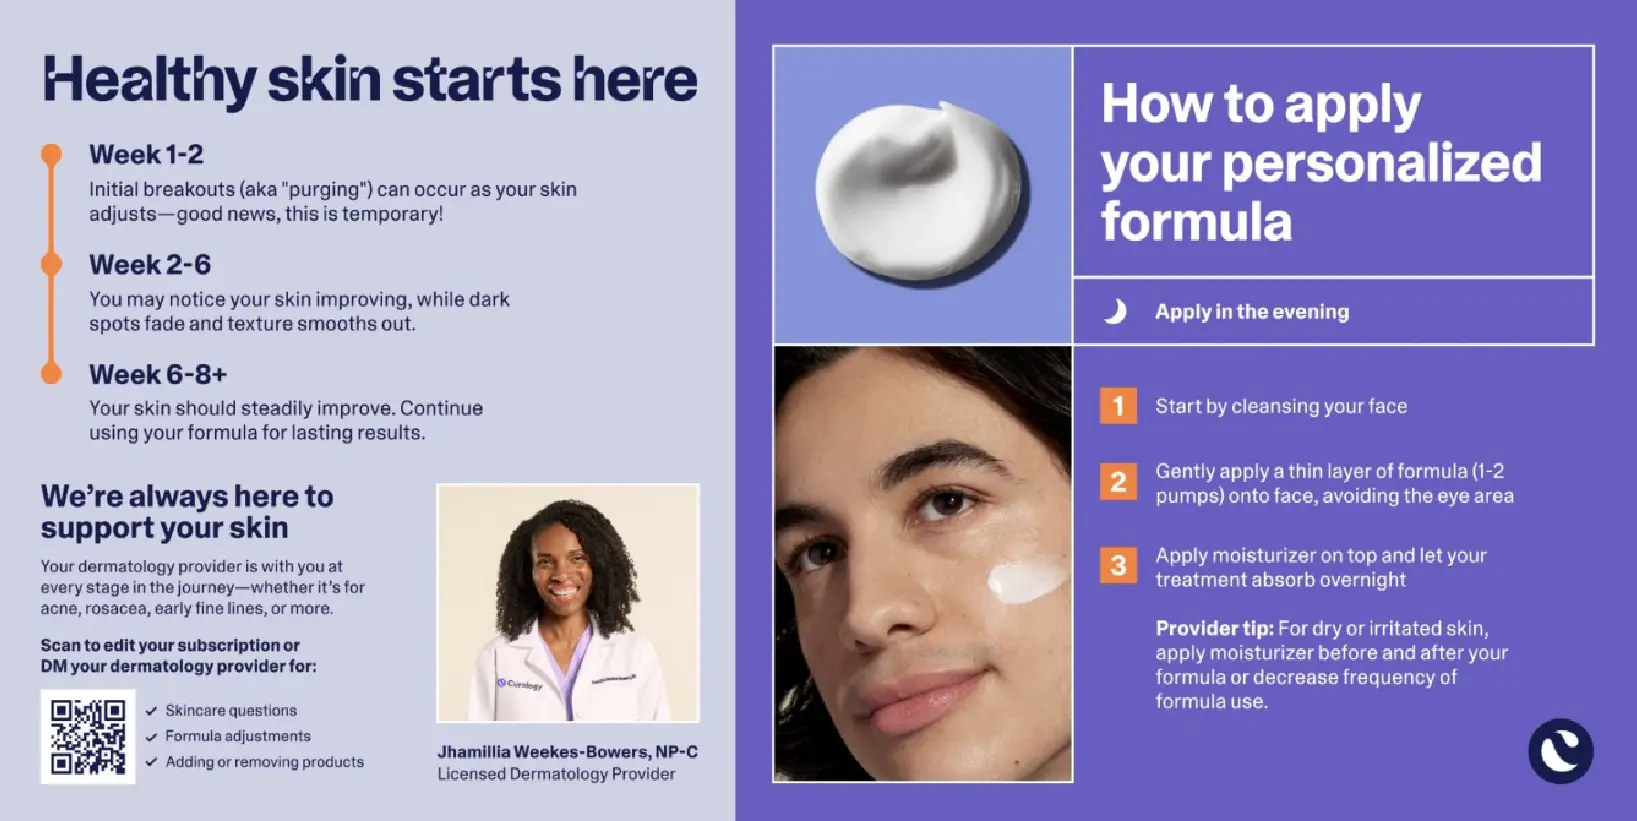 Packaging insert from Curology that teaches people how to apply to get a personalized formula for skincare.